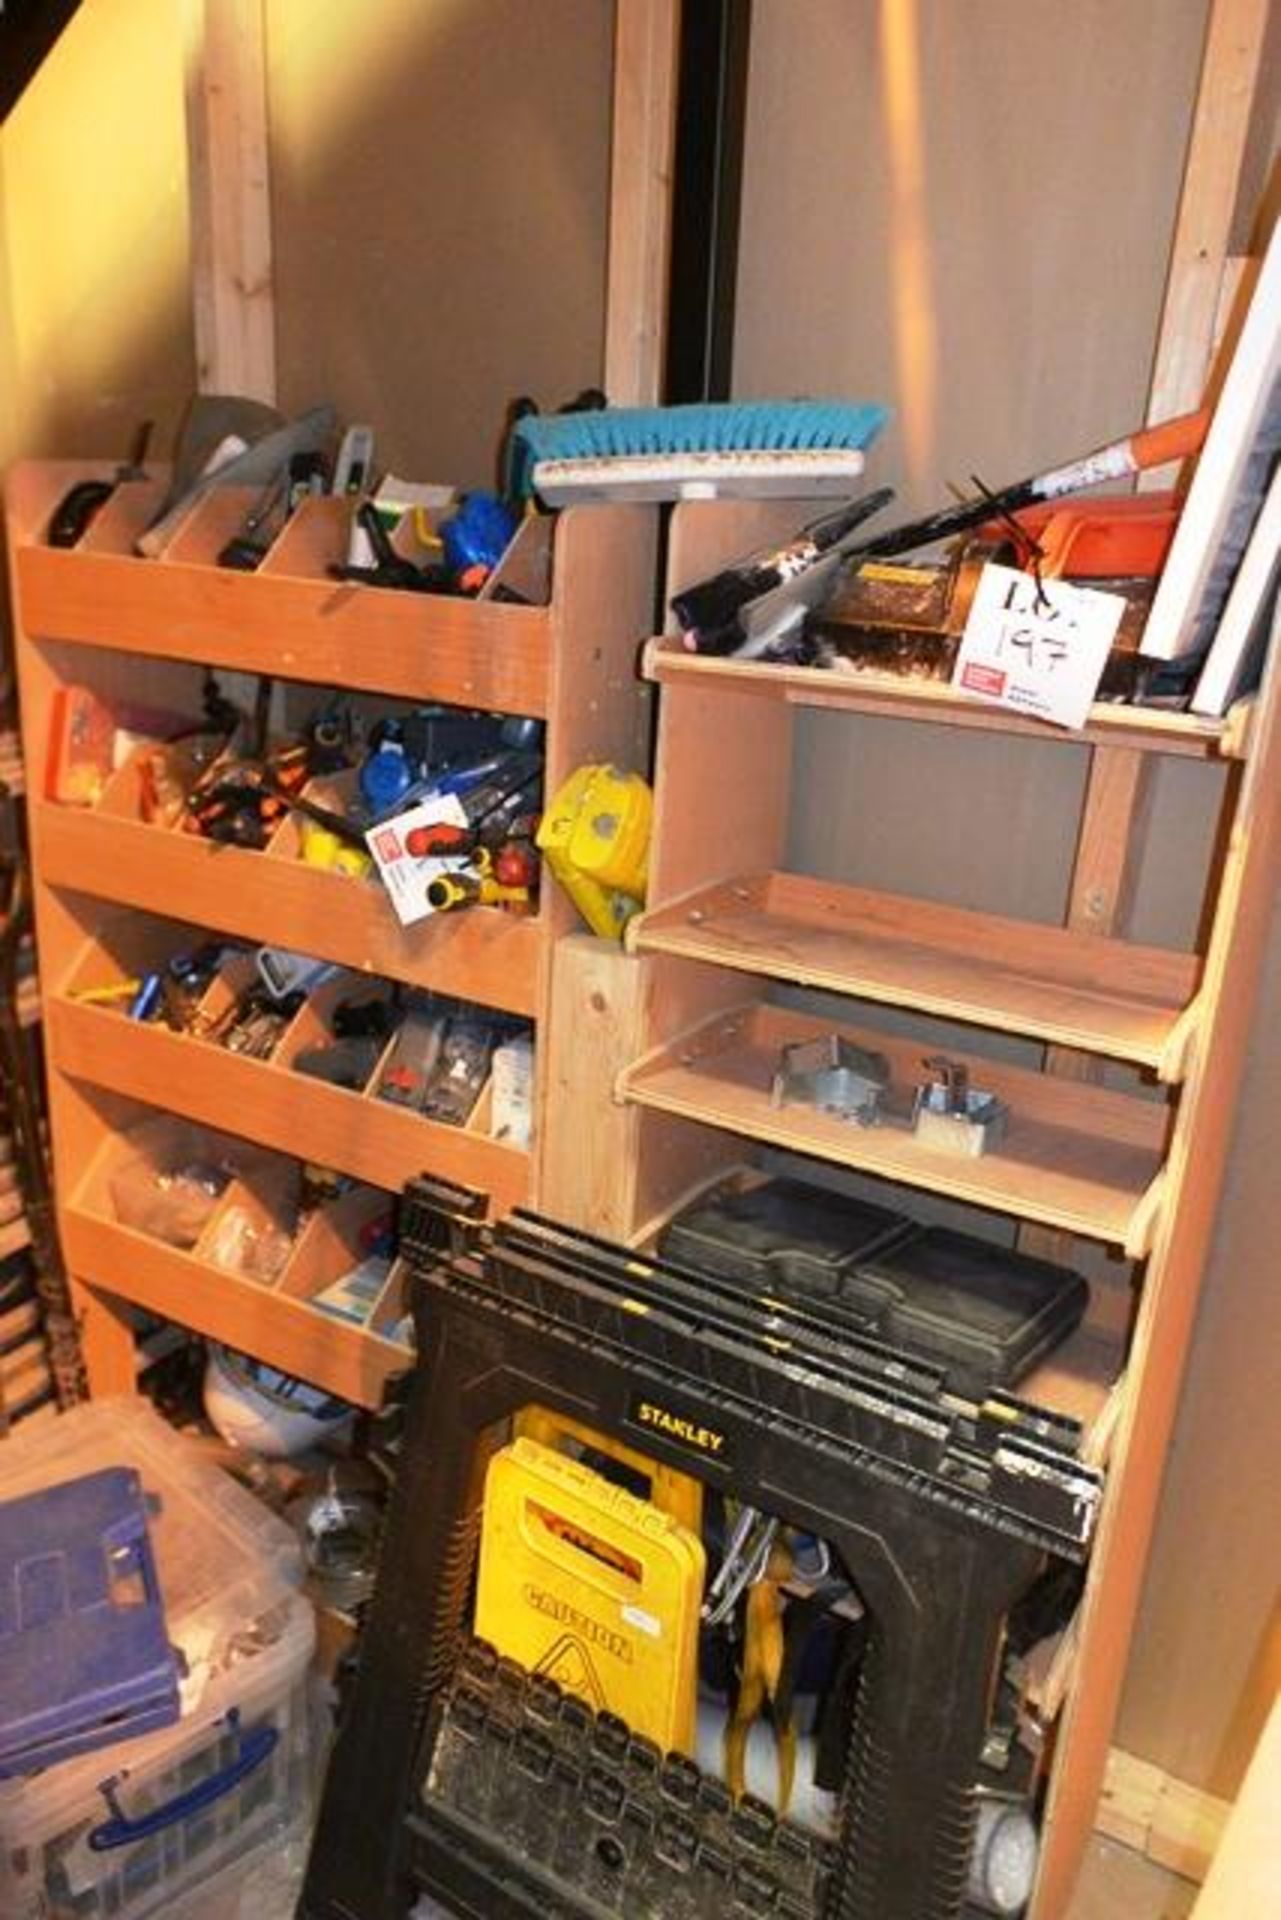 Quantity of various hand tools, etc., as lotted on storage rack